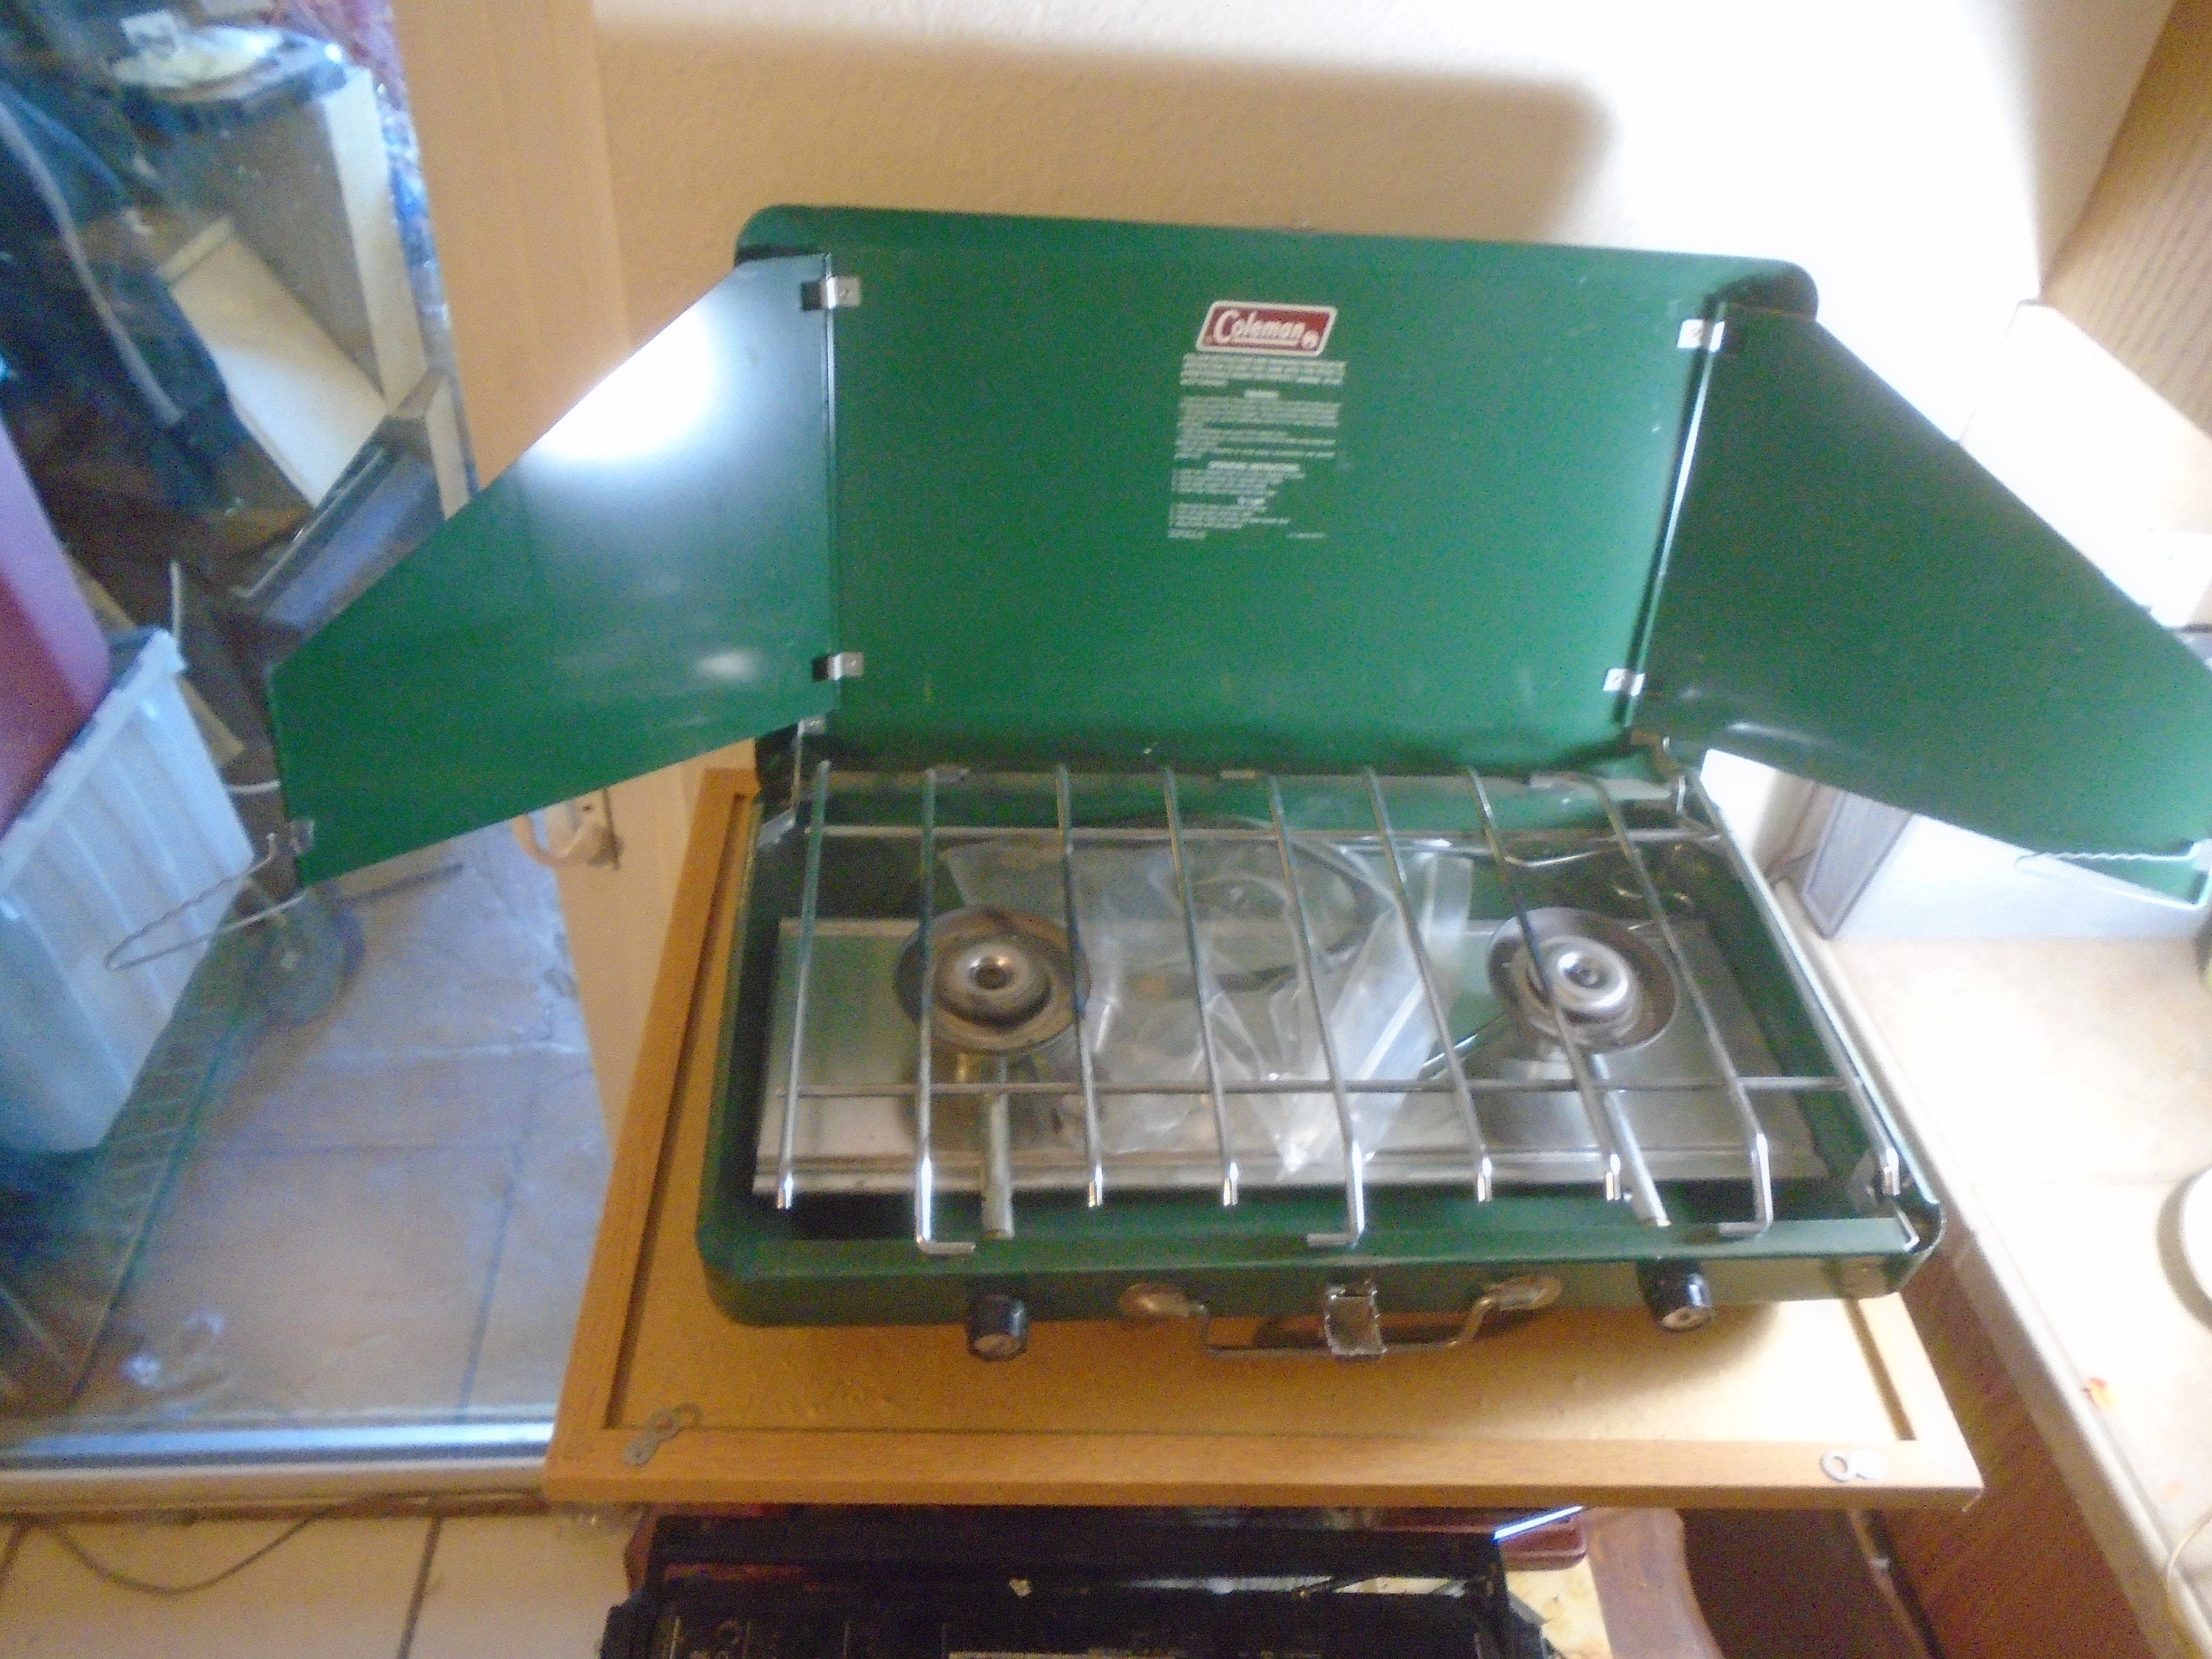 Picked up a Coleman 5400a700, but on one burner the propane only